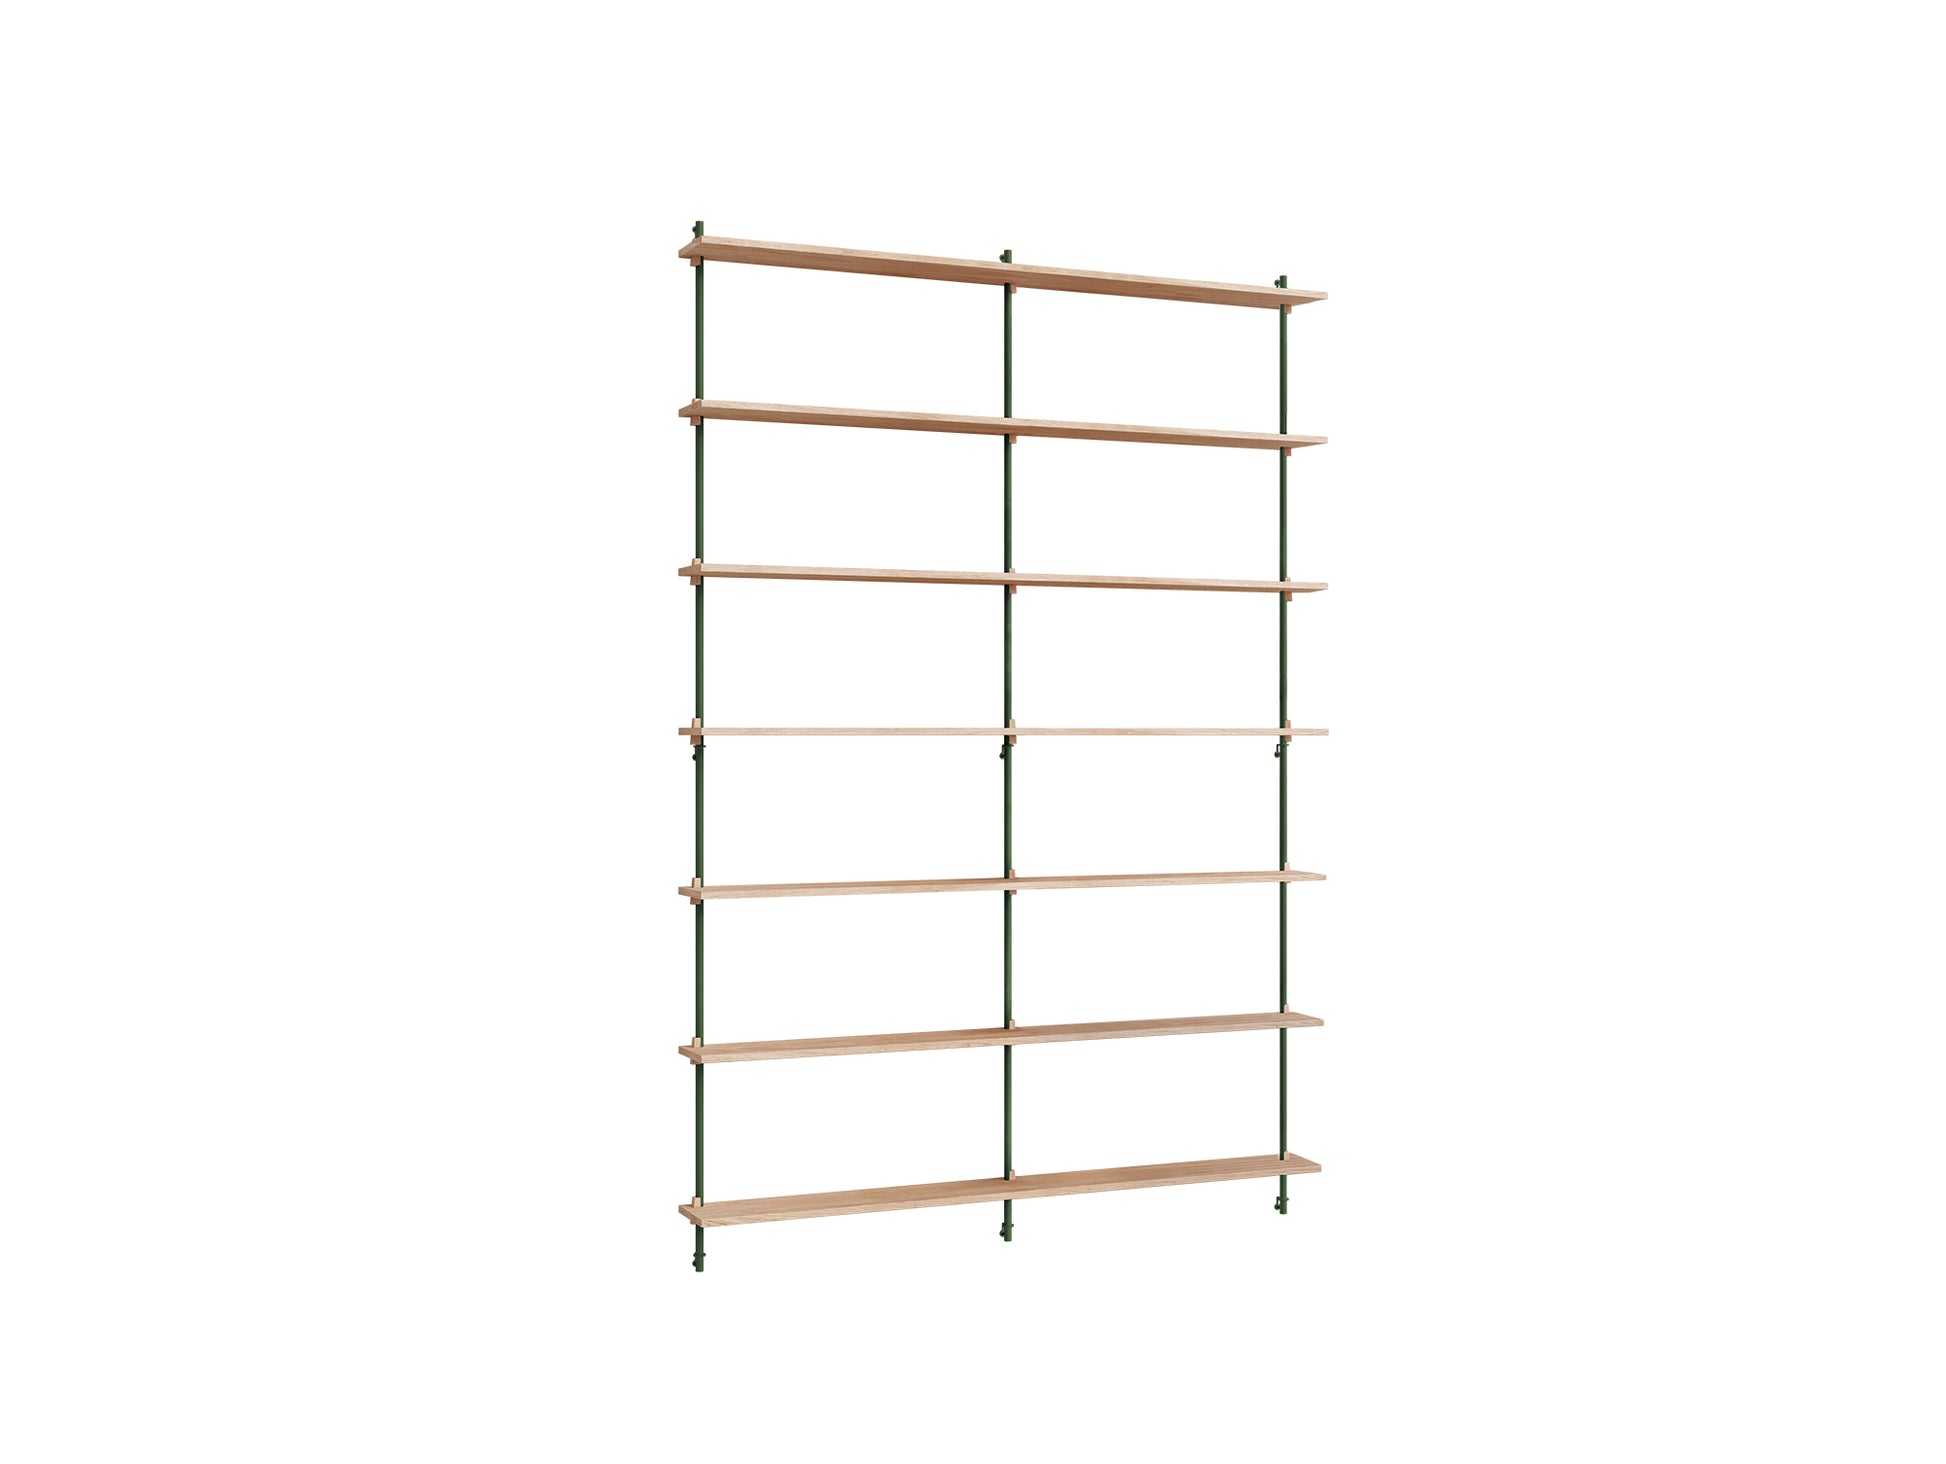 Wall Shelving System Sets (230 cm) by Moebe - WS.230.2.B / Pine Green Uprights / Oiled Oak